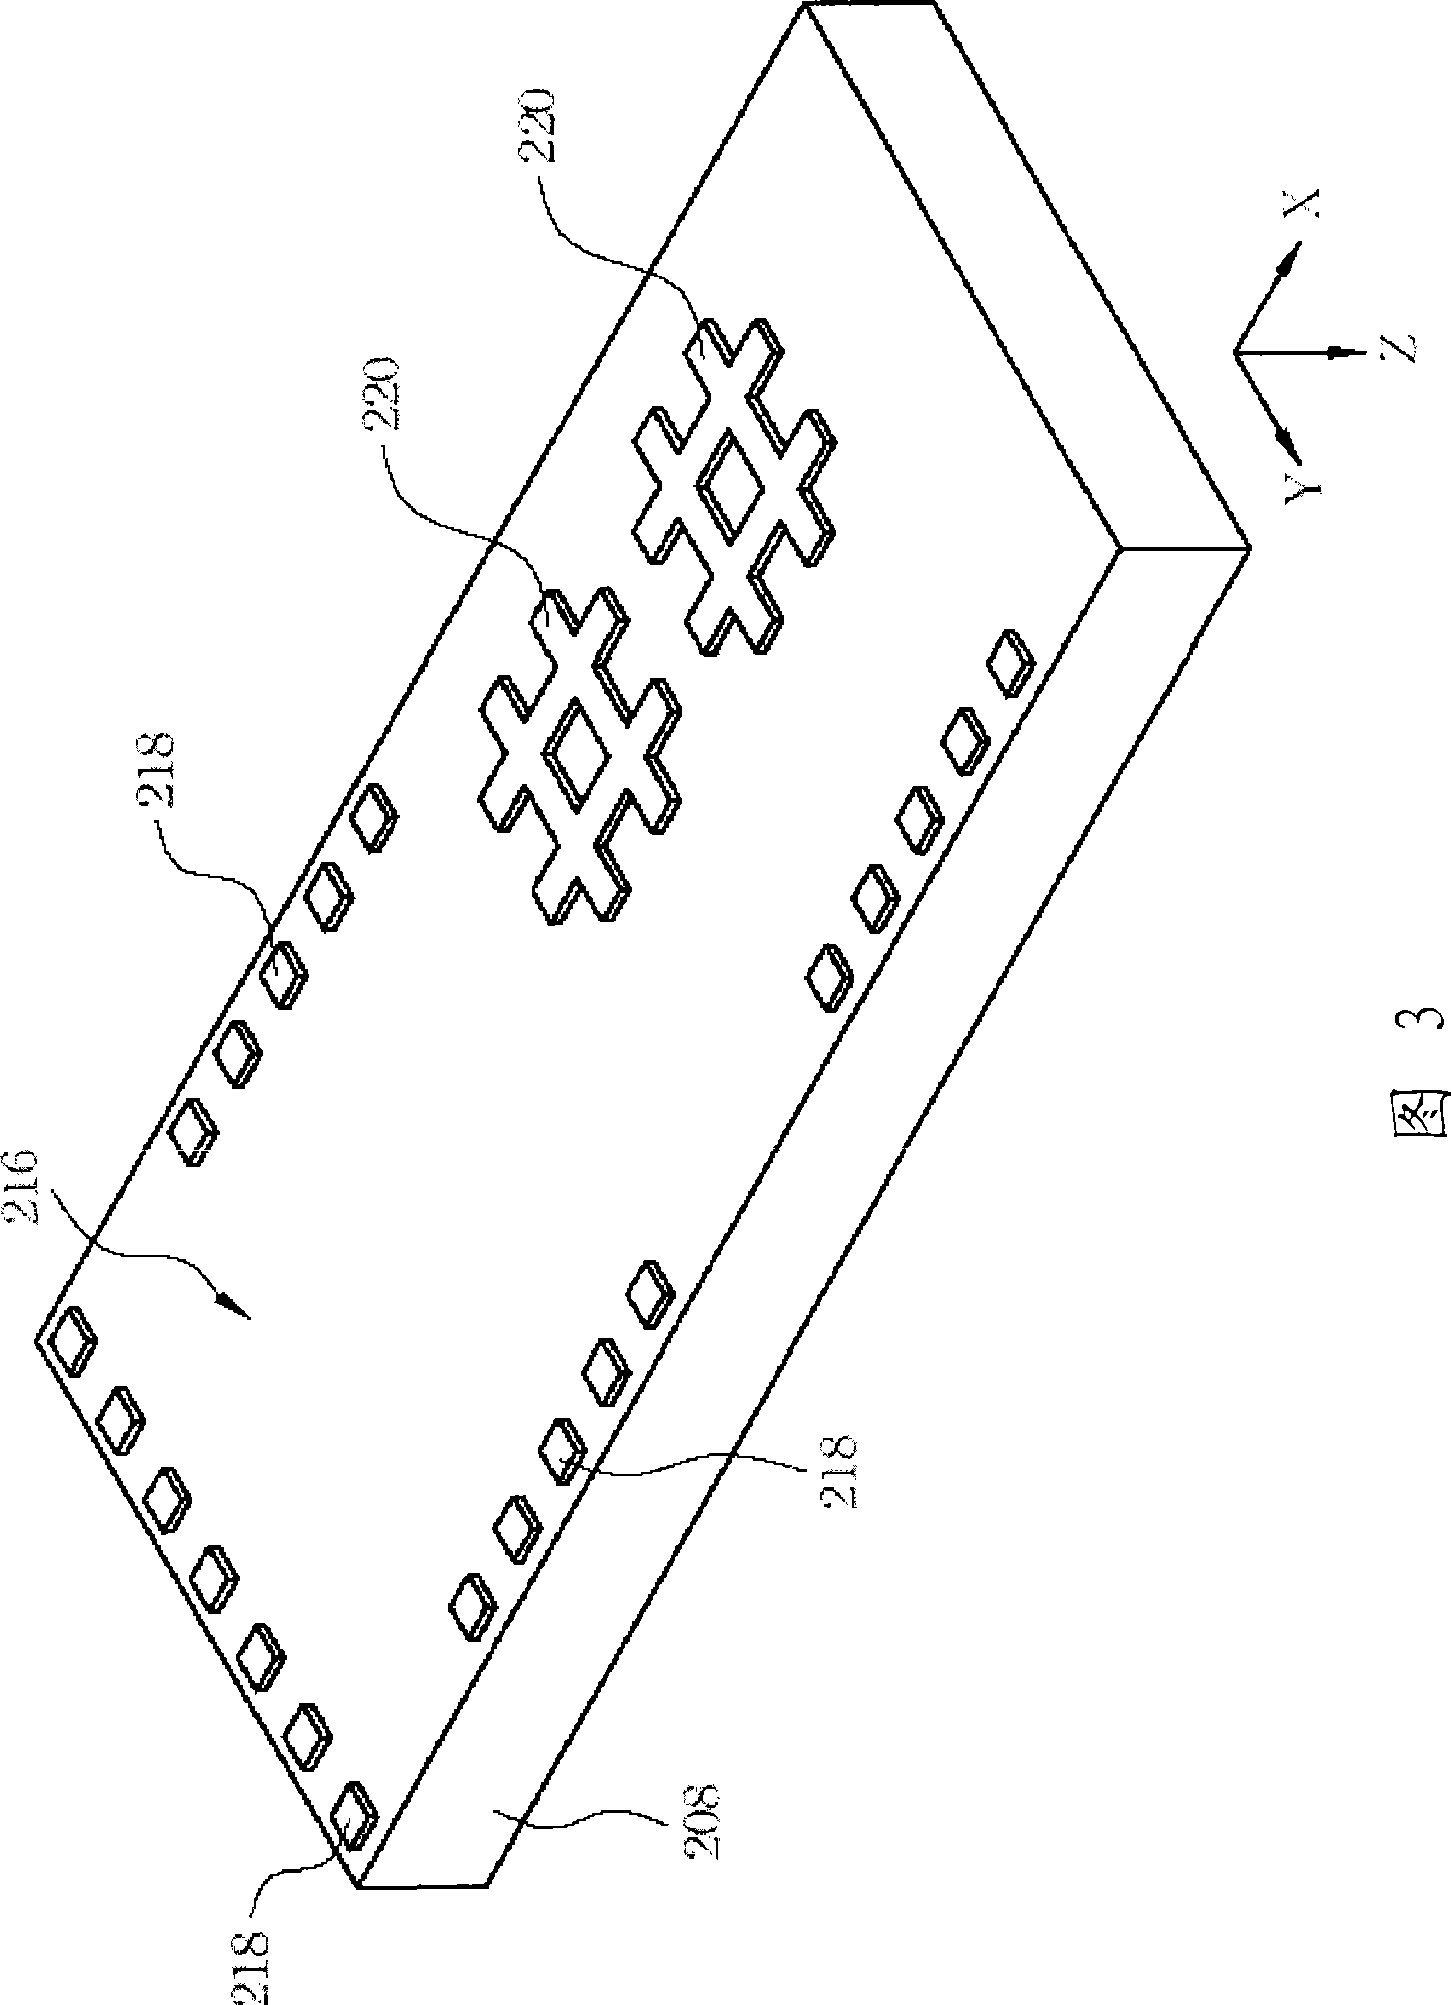 Display device with flip-chip structure